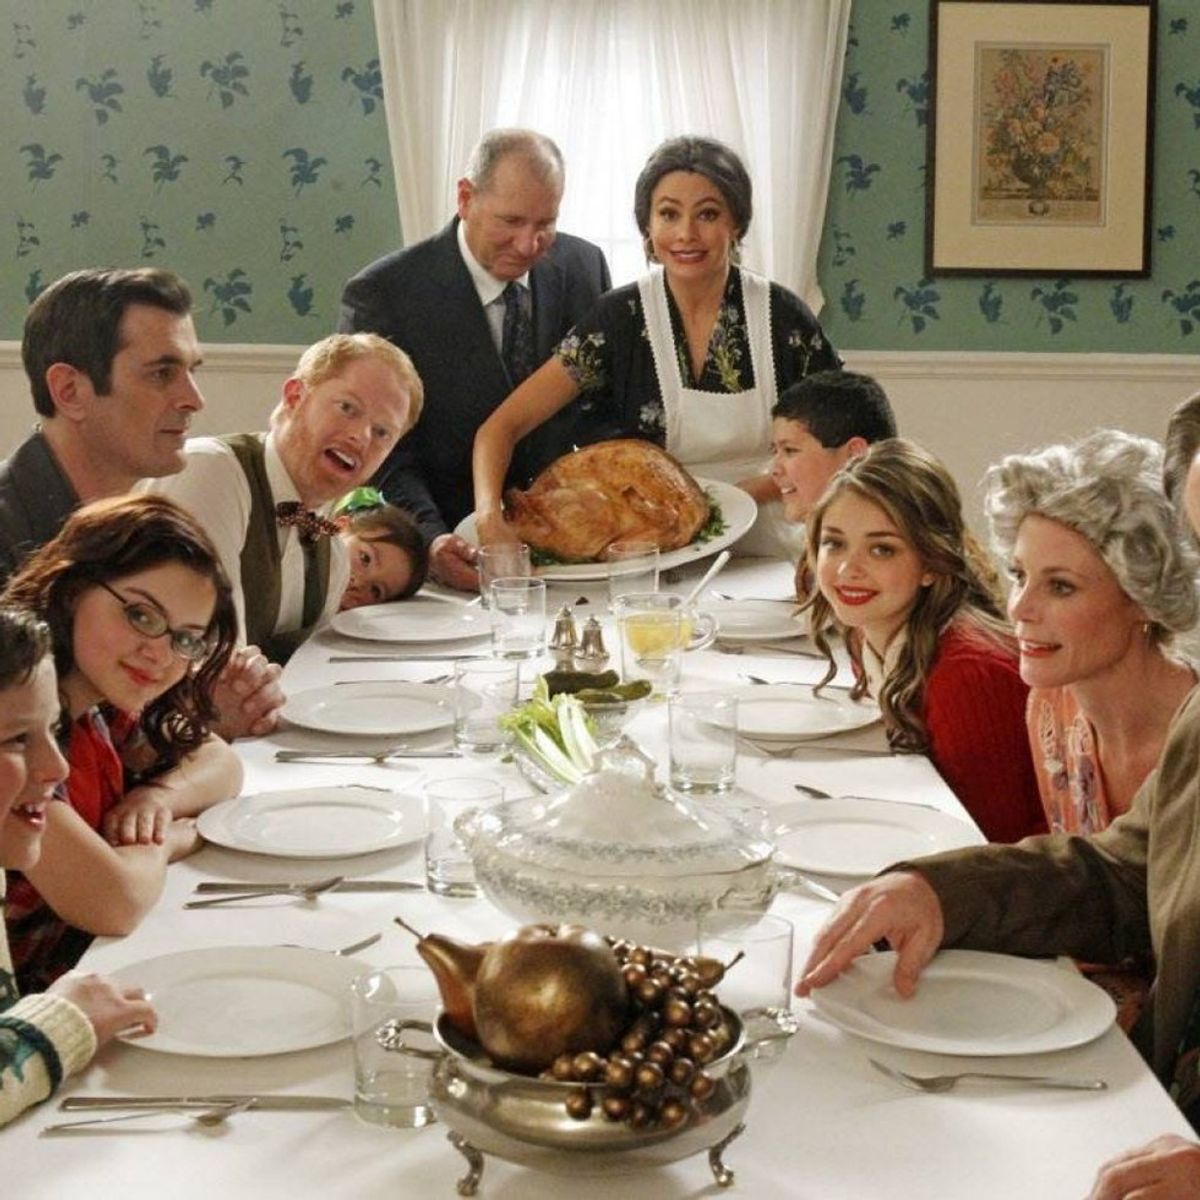 10 Questions Your Family Will Ask You At Holiday Gatherings